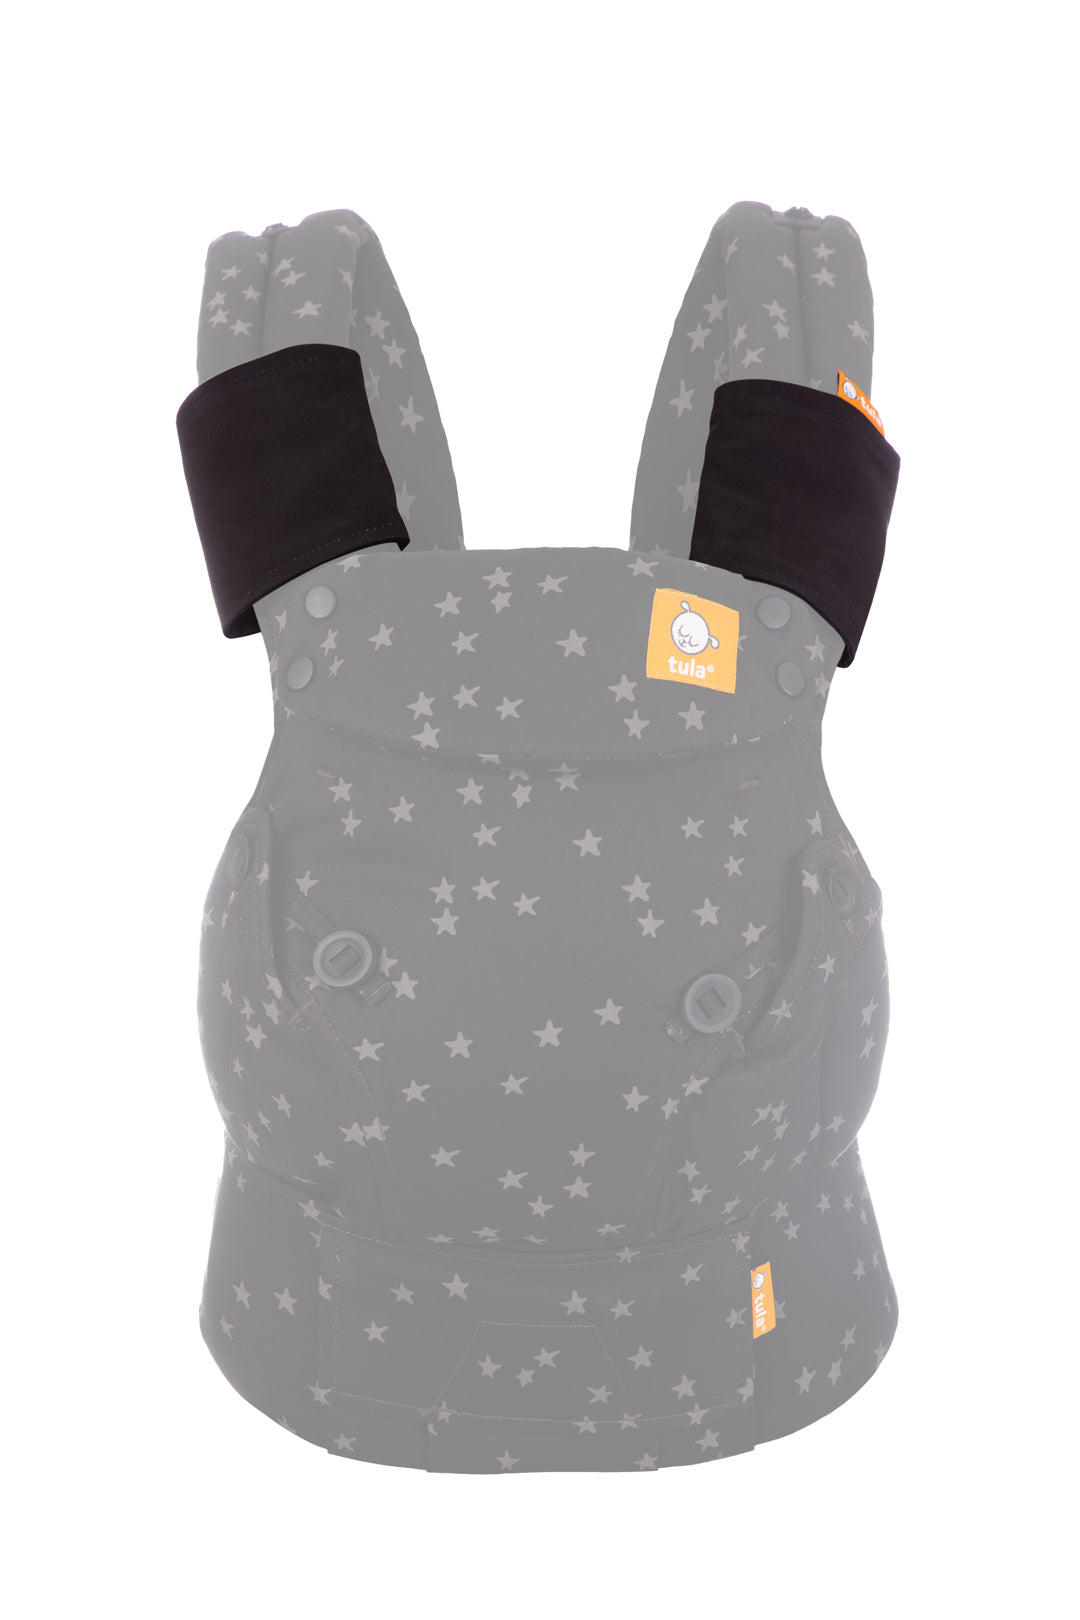 The Droola Strap Covers Urbanista from Tula in black on a Tula baby carrier.